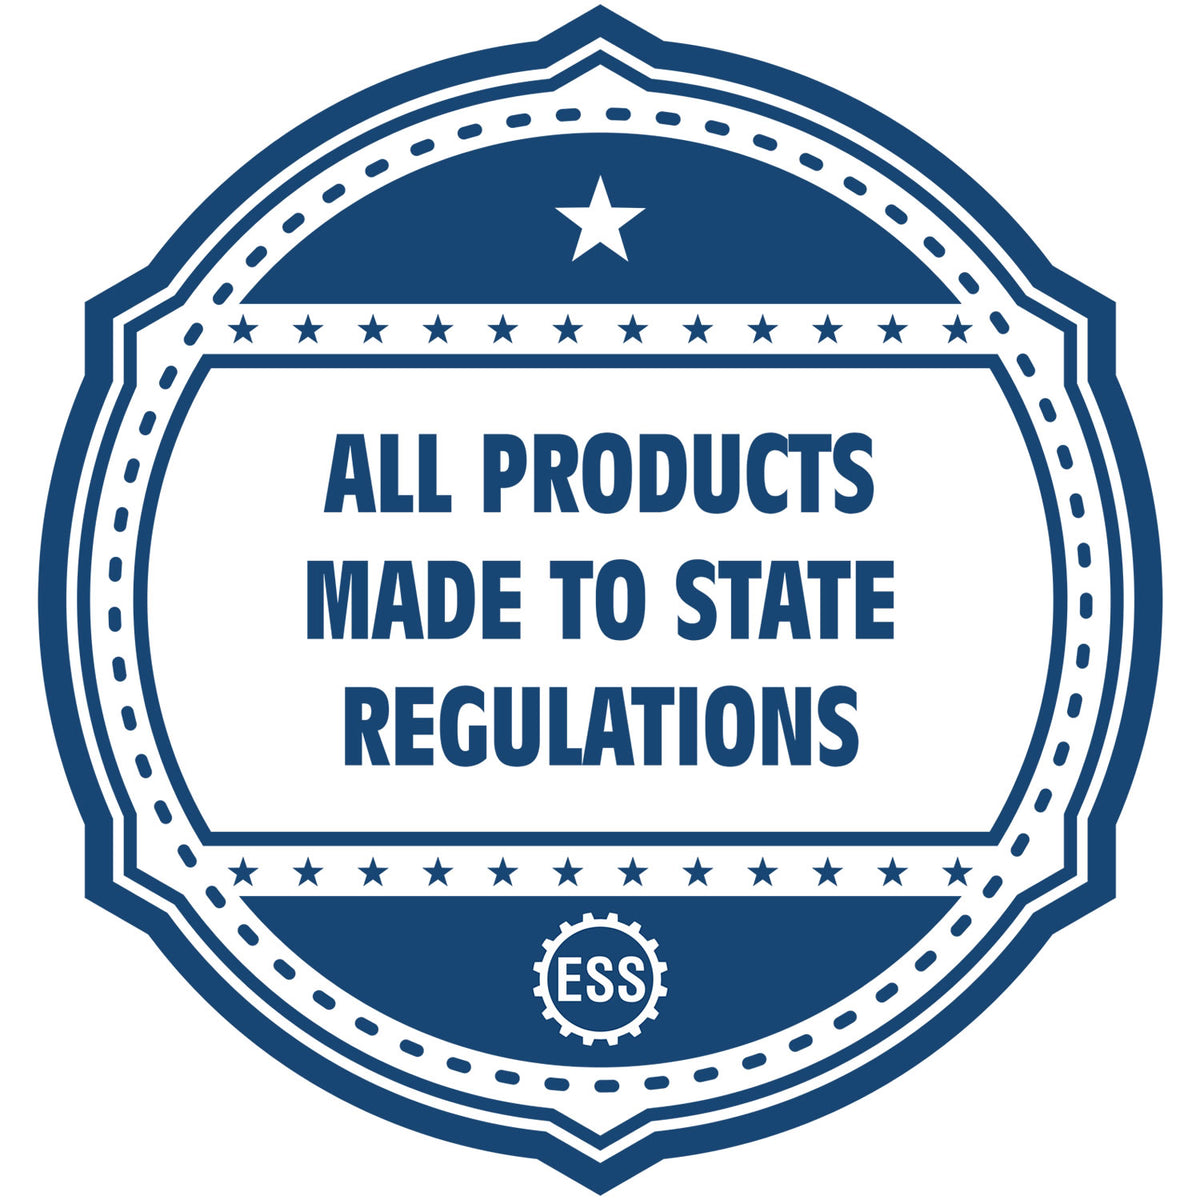 An icon or badge element for the Slim Pre-Inked Wisconsin Land Surveyor Seal Stamp showing that this product is made in compliance with state regulations.